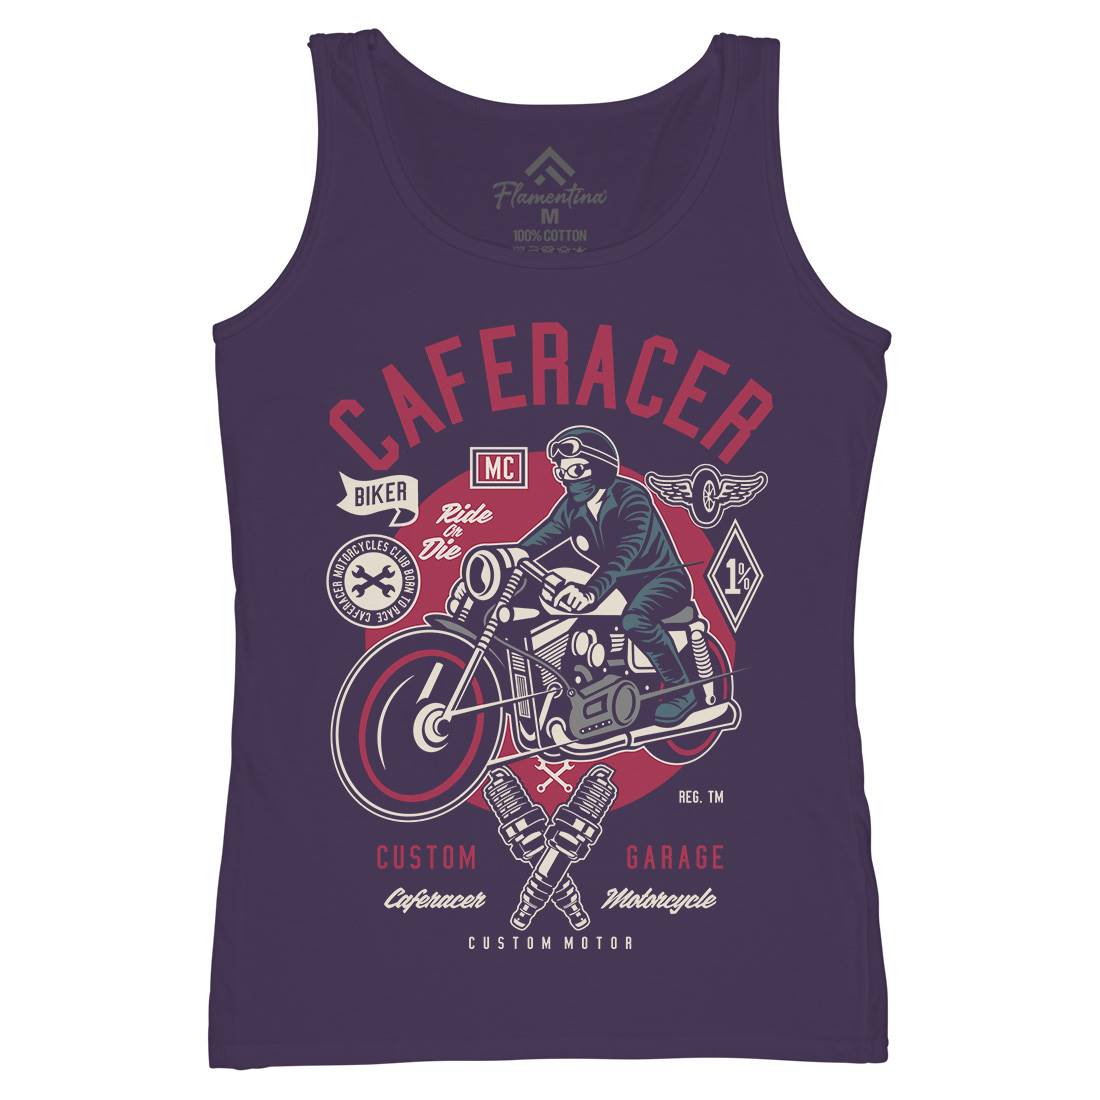 Caferacer Womens Organic Tank Top Vest Motorcycles D513